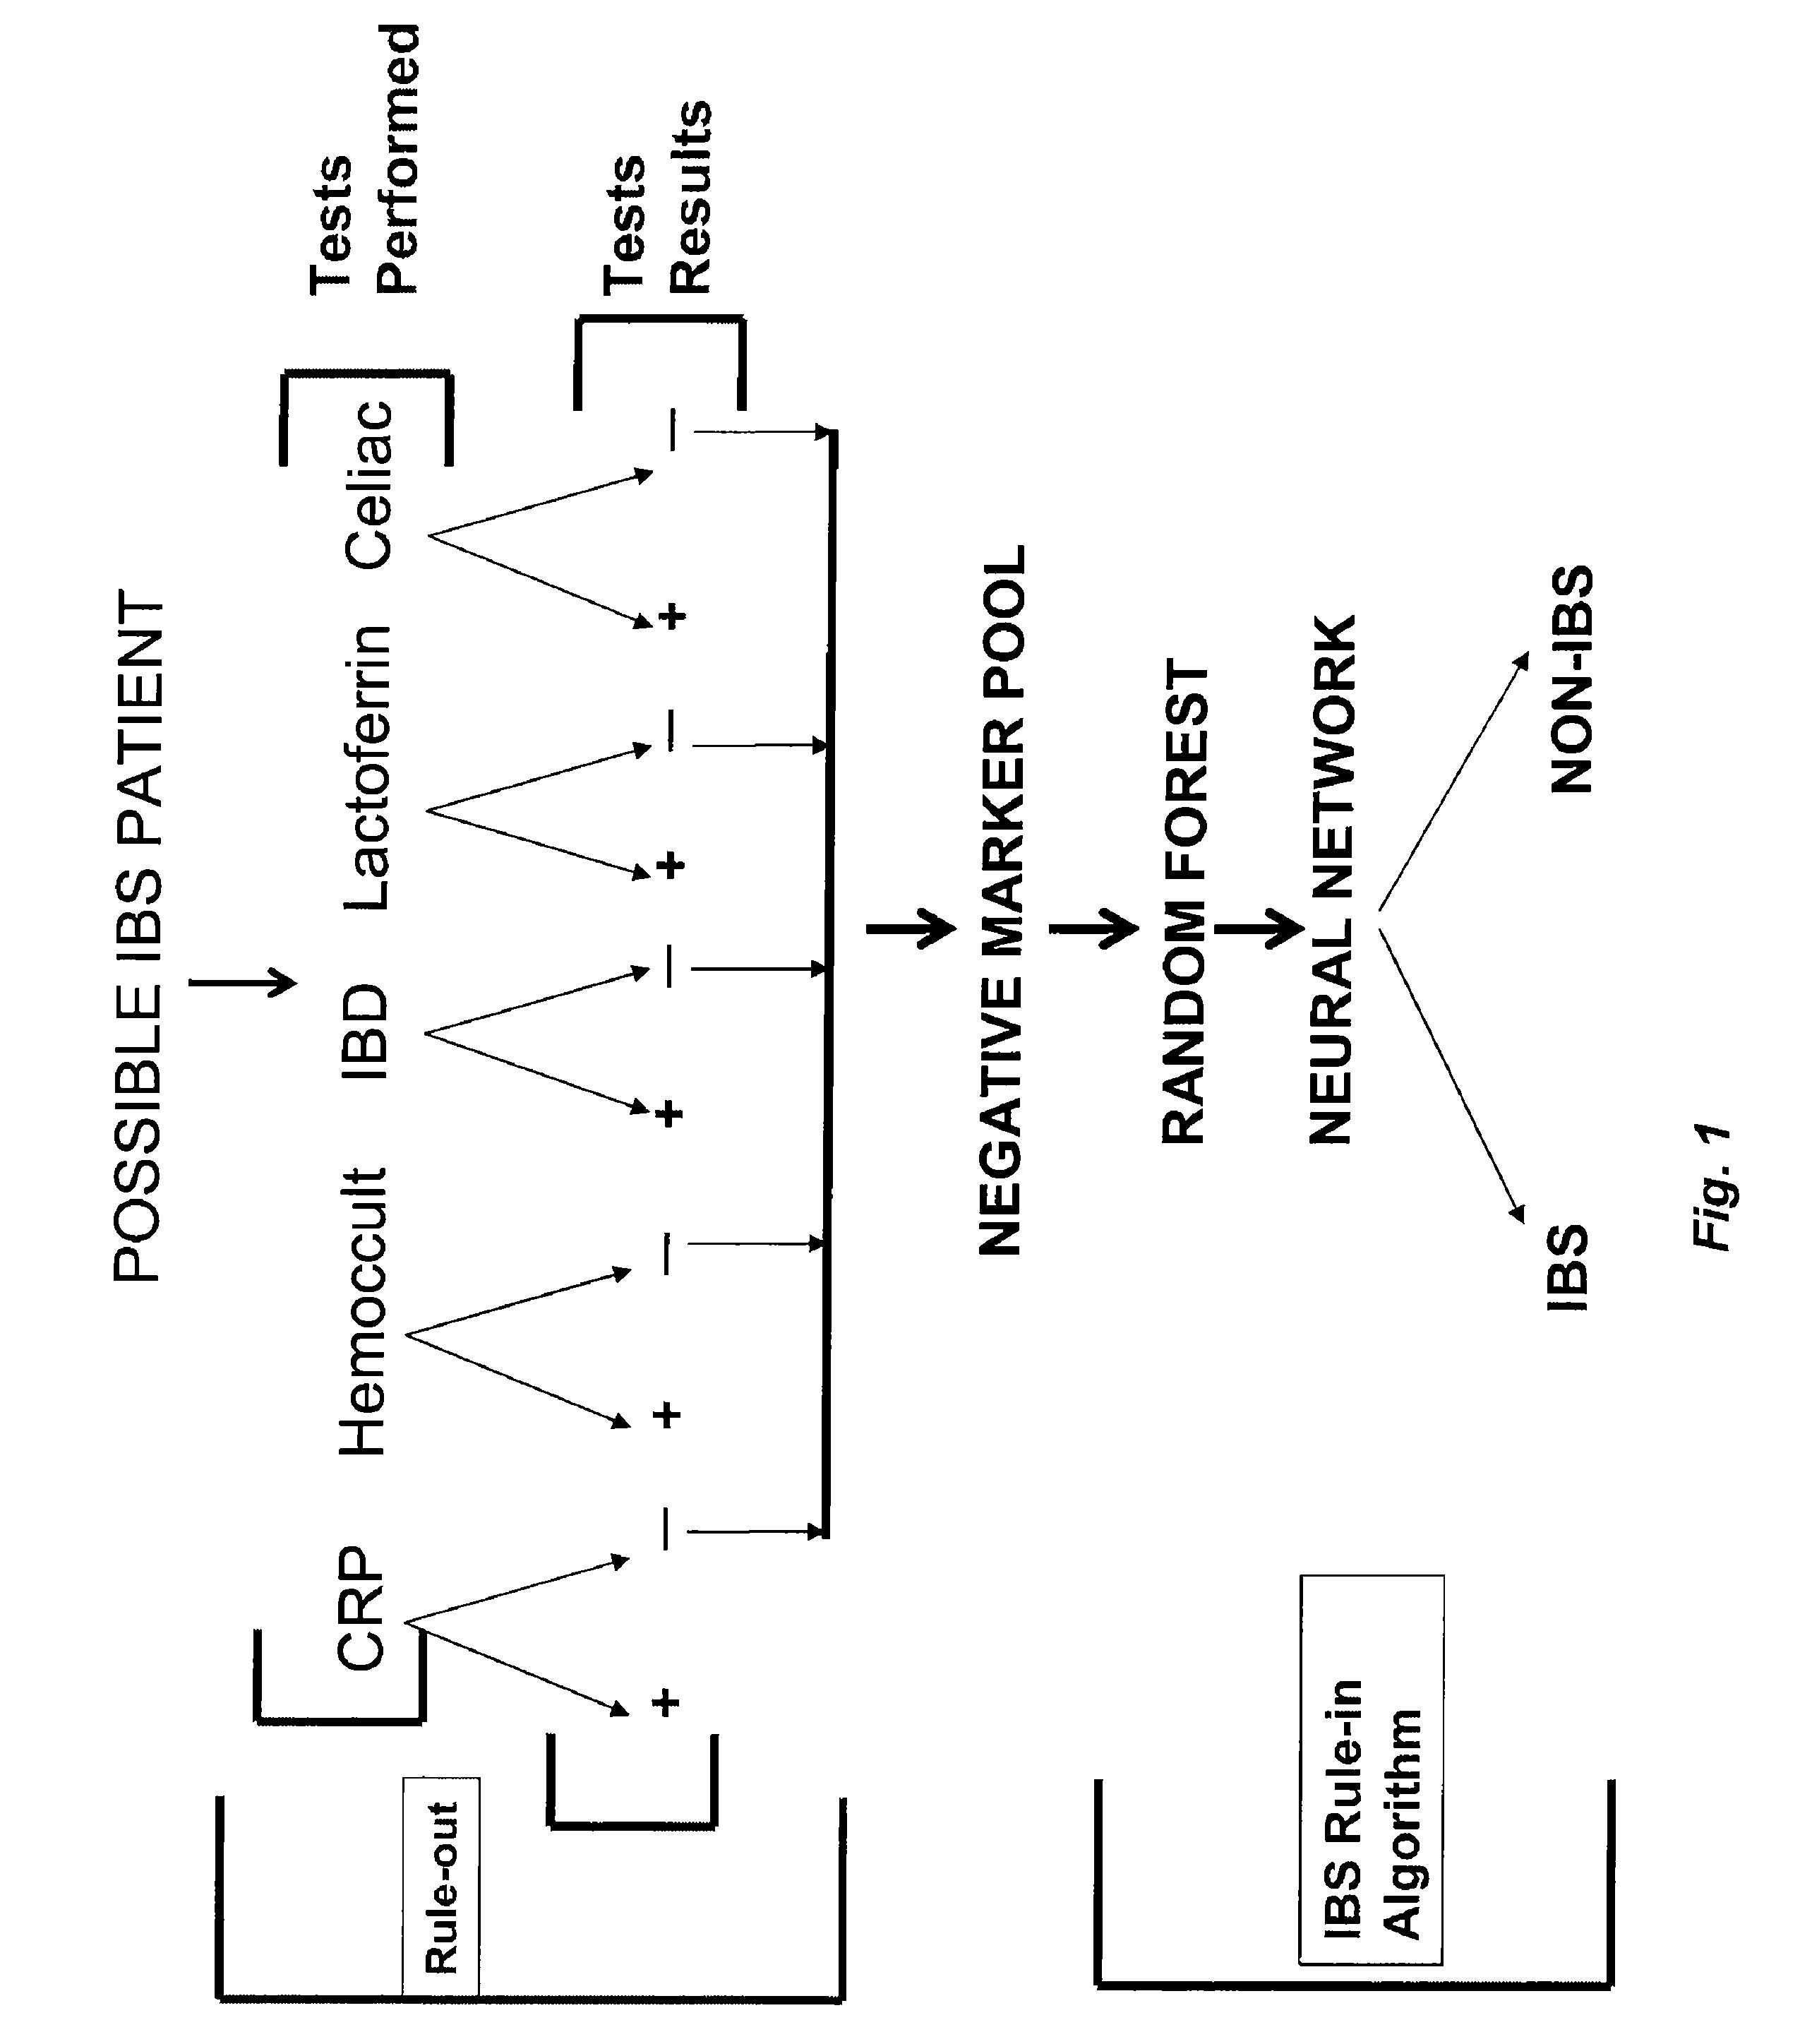 Method and system for assisting in diagnosing irritable bowel syndrome